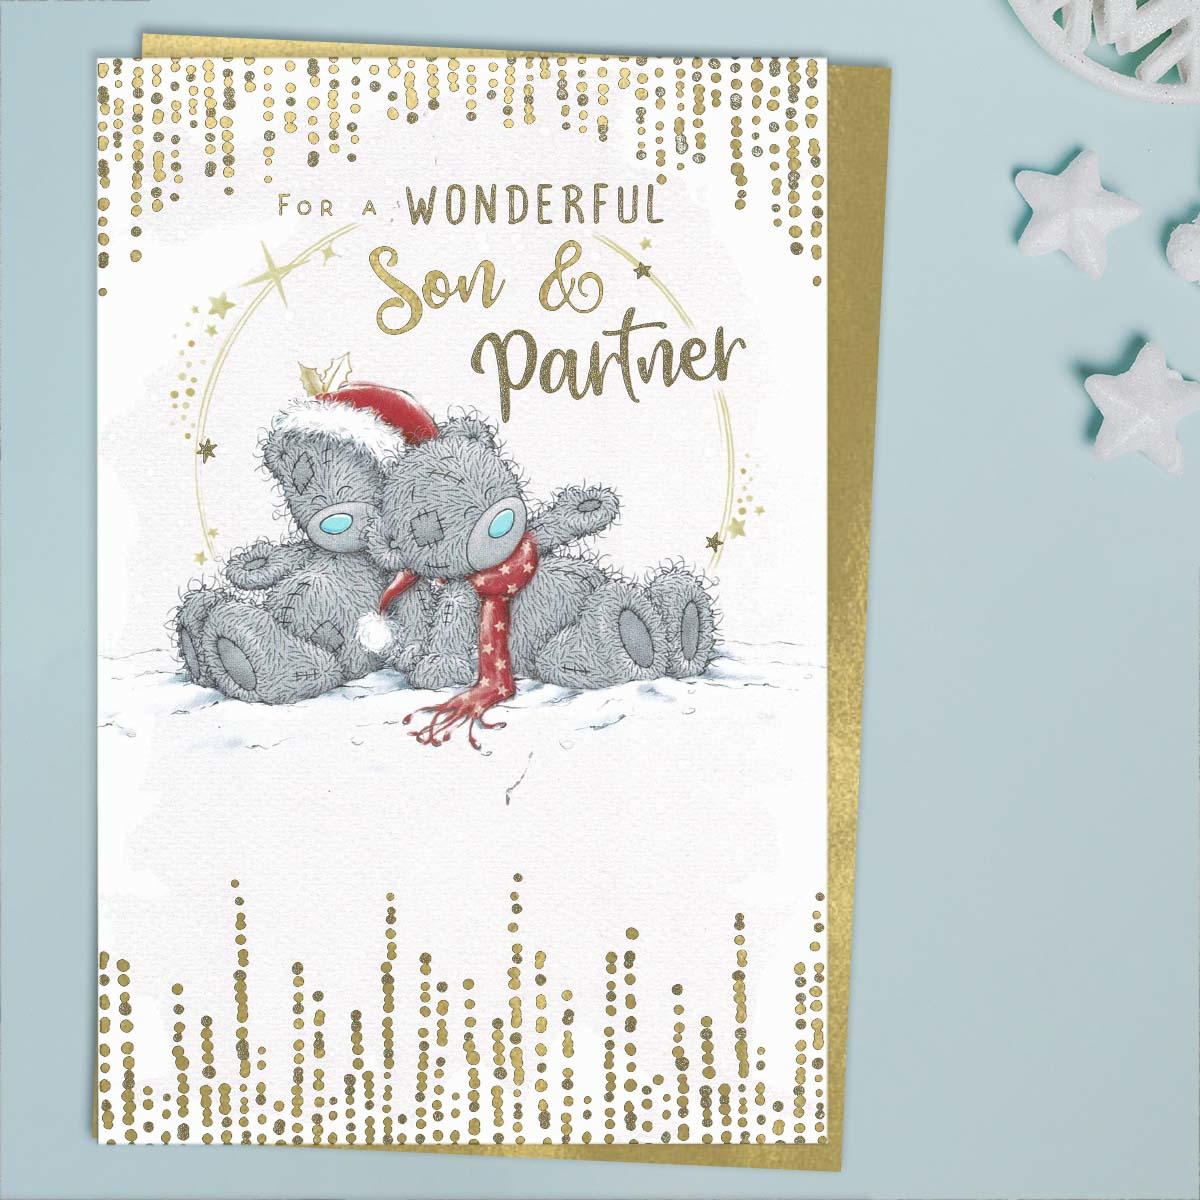 Wonderful Son And Partner Tatty Teddy Christmas Card Front Image